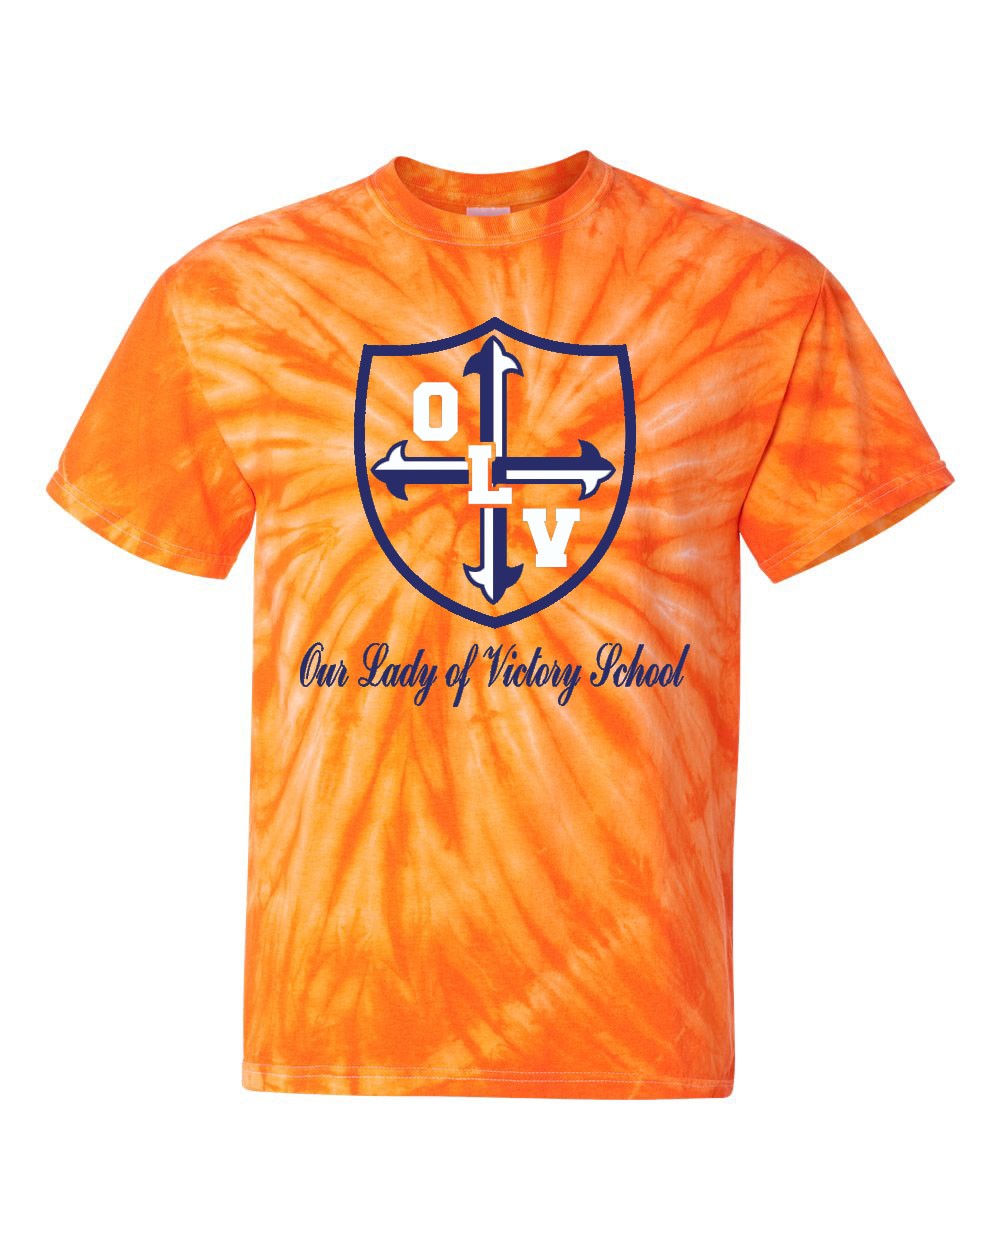 OLV Spirit S/S Tie Dye T-Shirt w/ Navy Logo - Please Allow 2-3 Weeks for Delivery